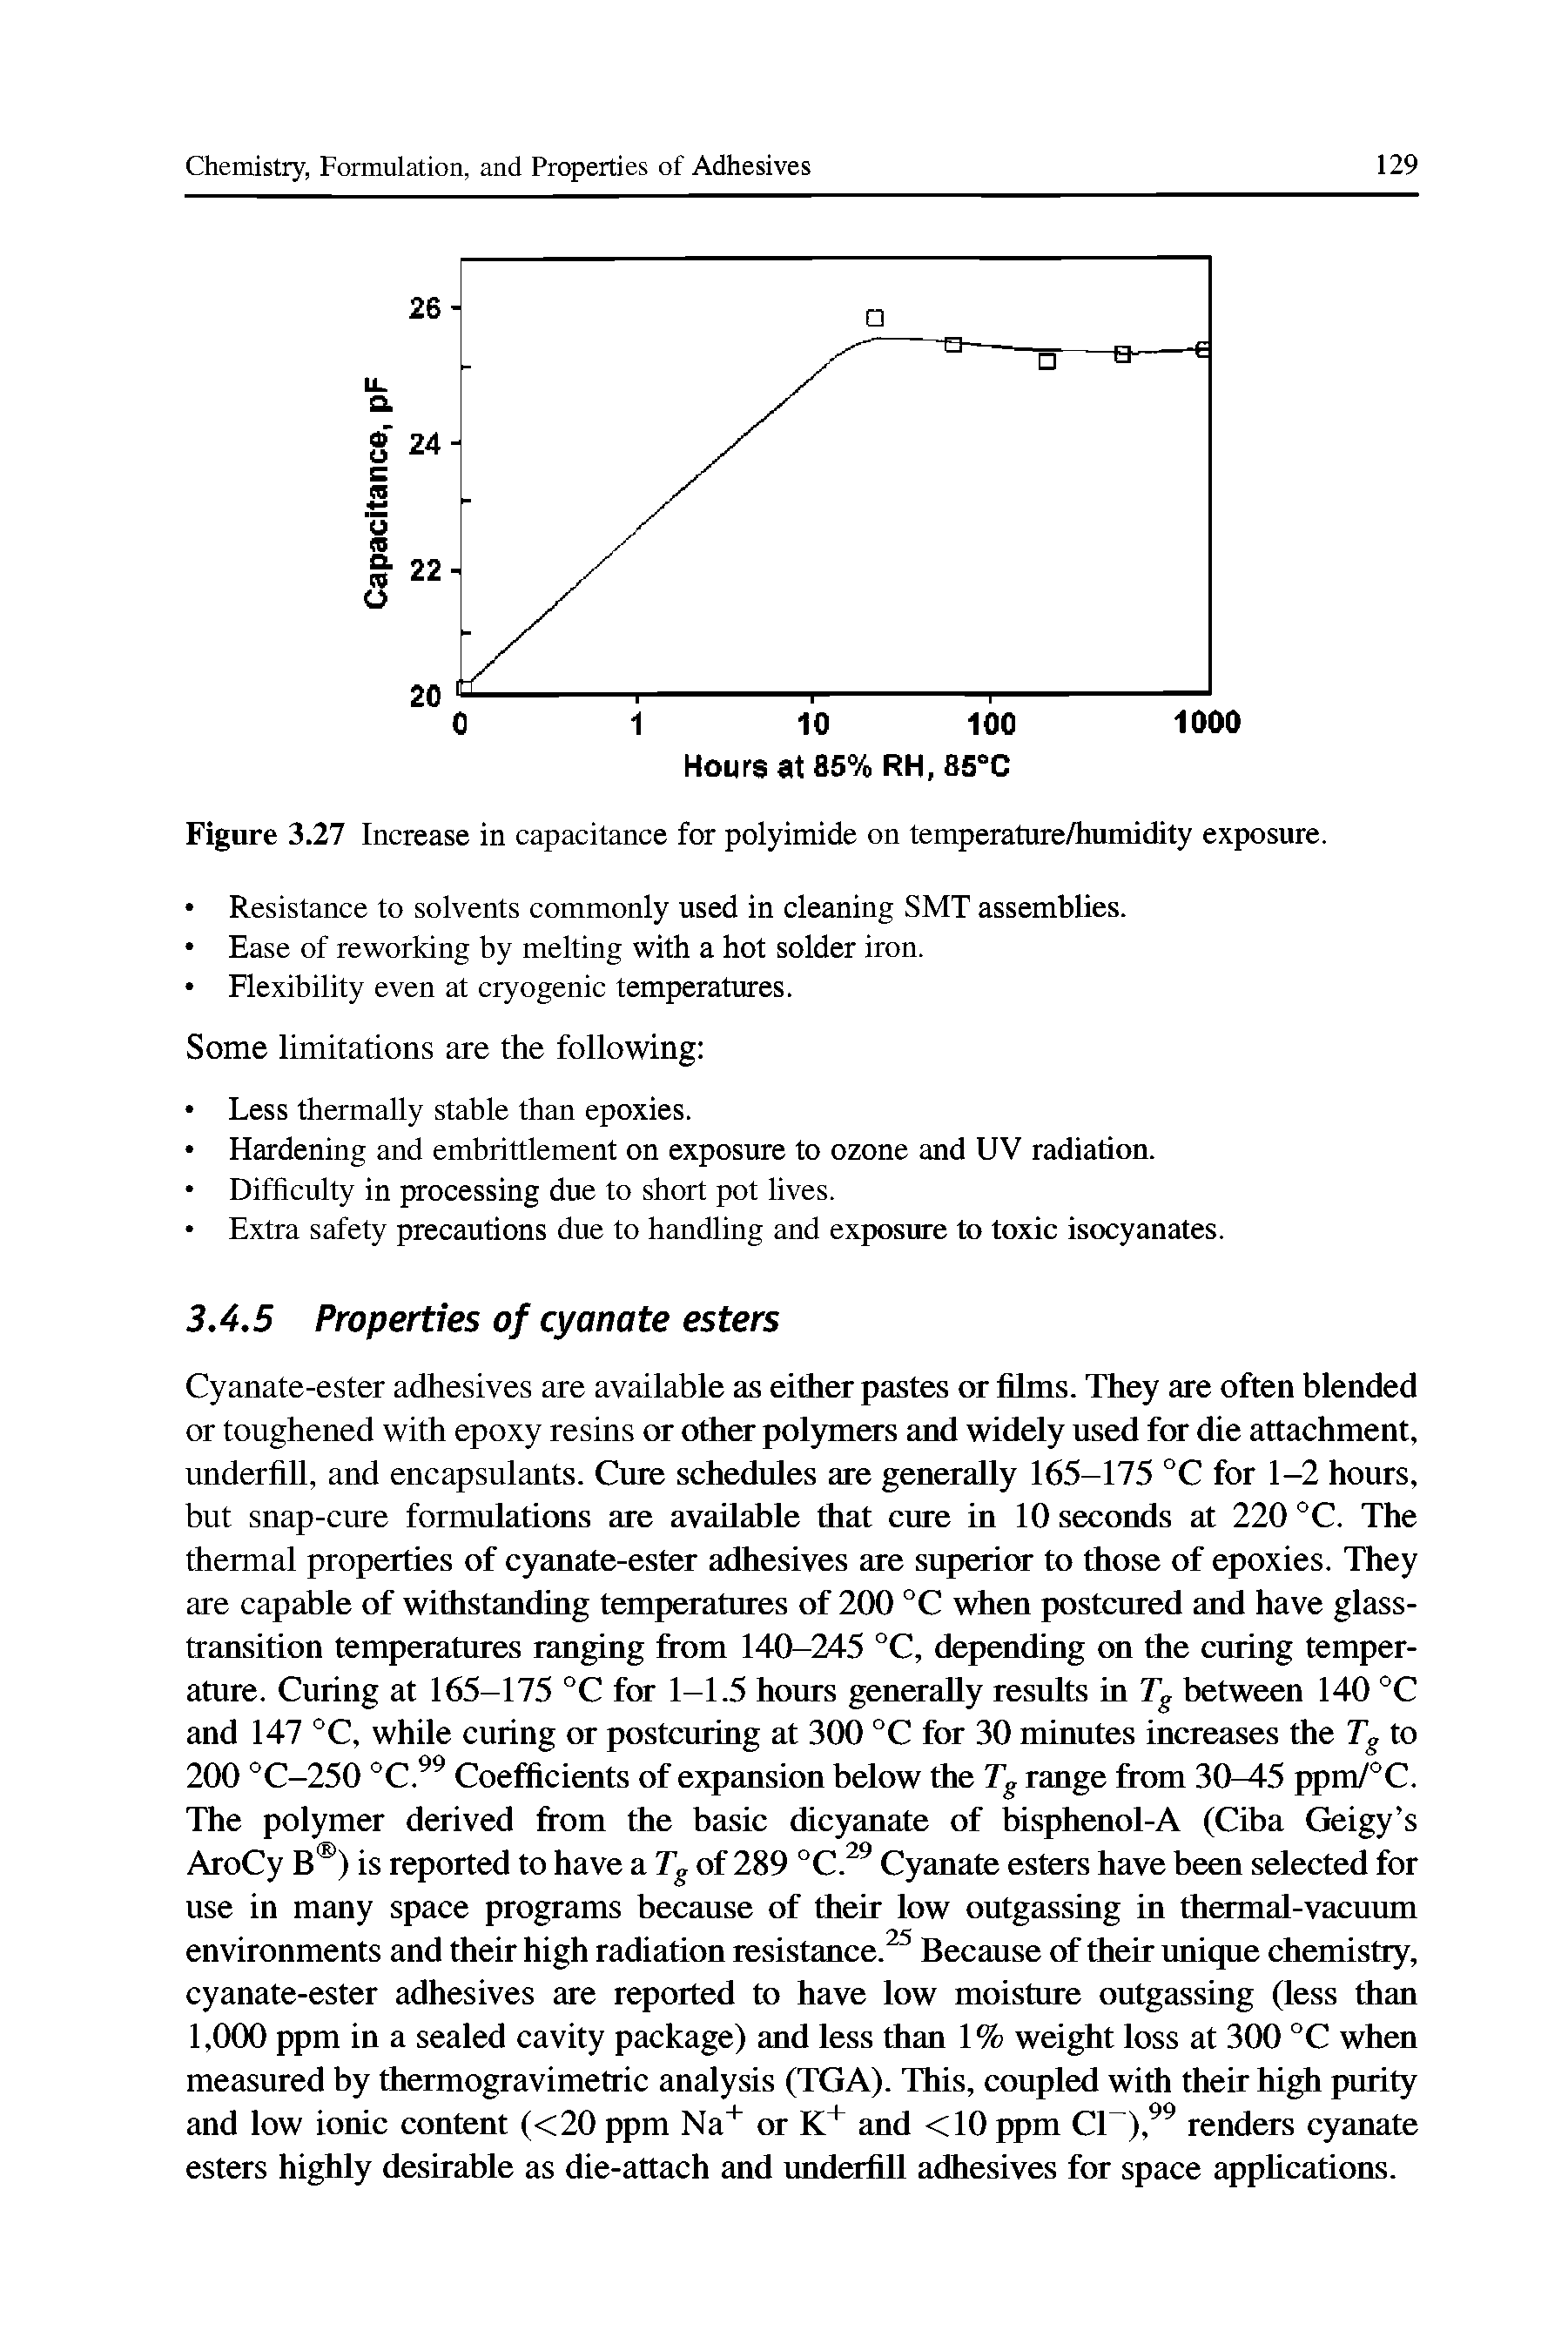 Figure 3.27 Increase in capacitance for polyimide on temperature/humidity exposure.